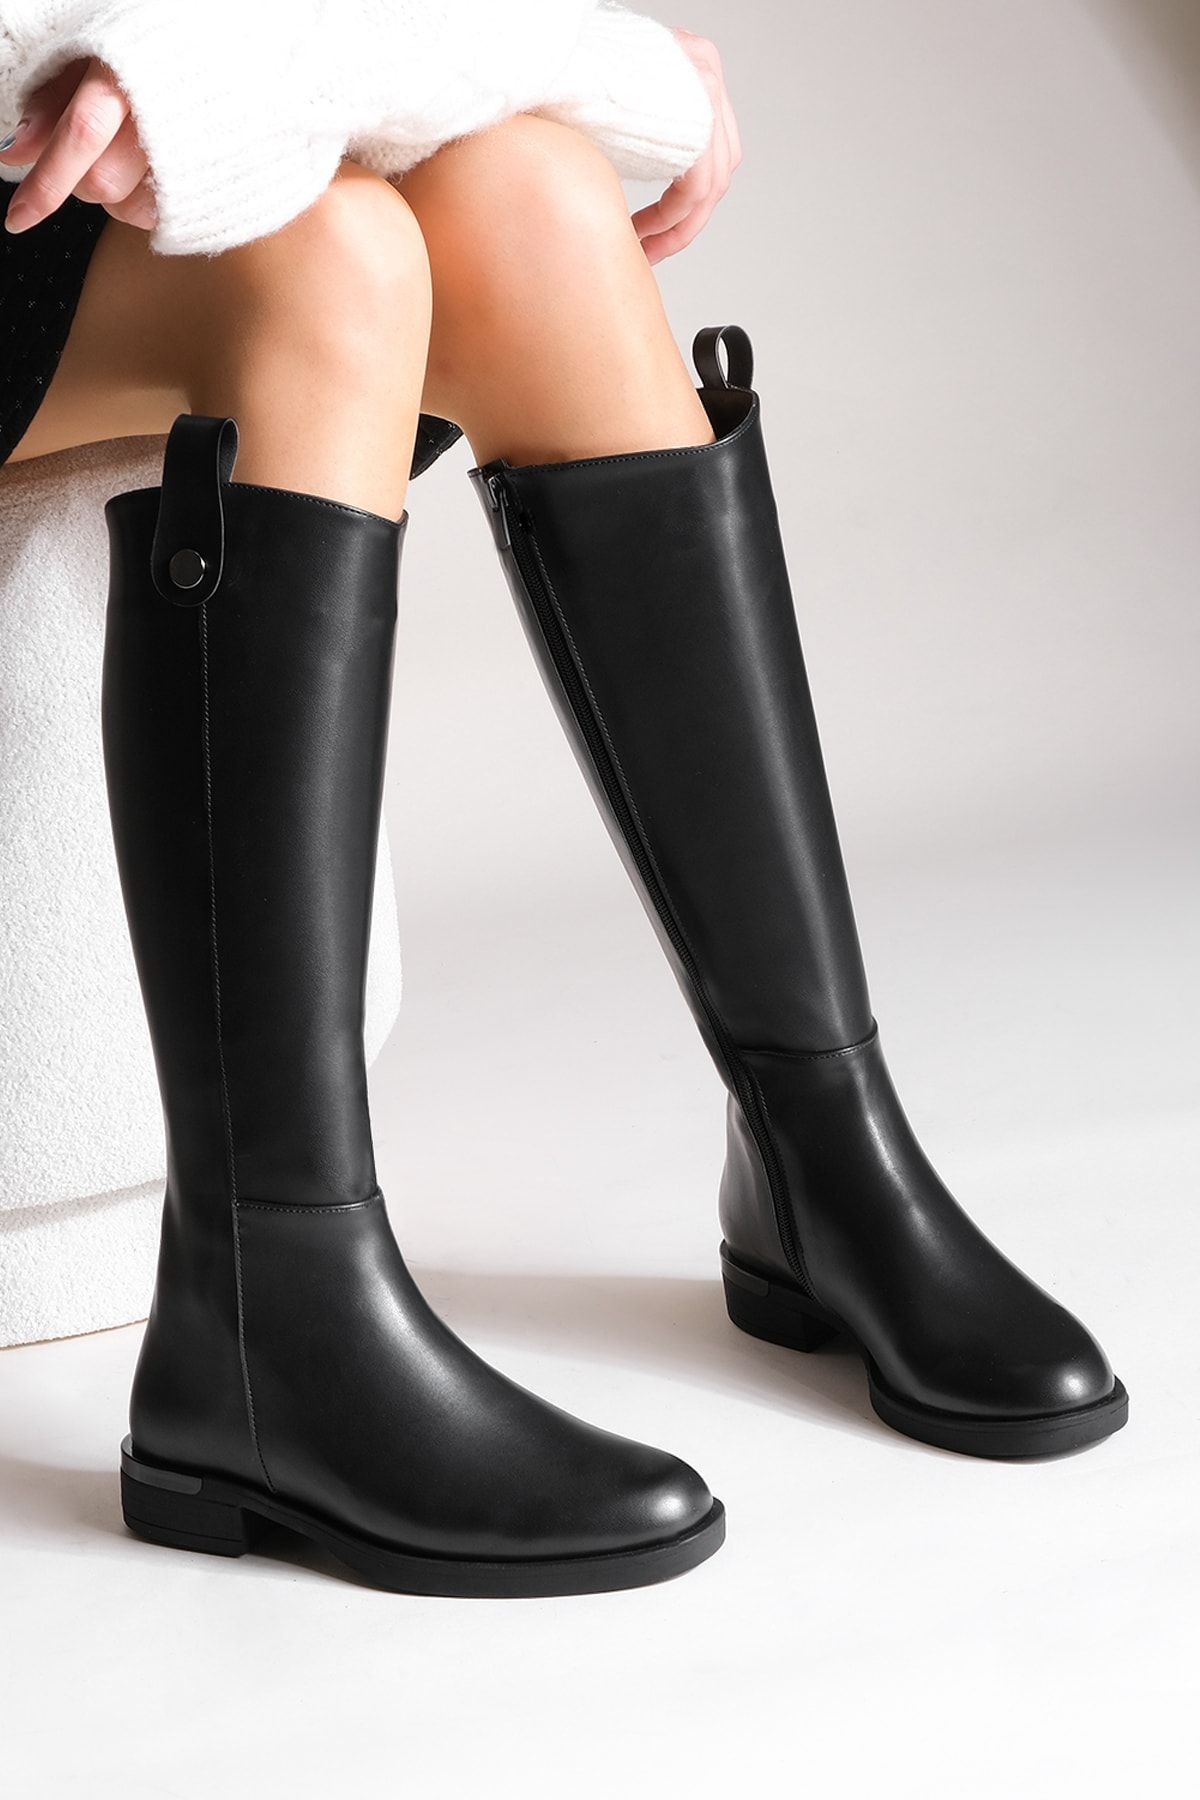 Women's Boots & Knee-High Boots | Step into Style - Trendyol